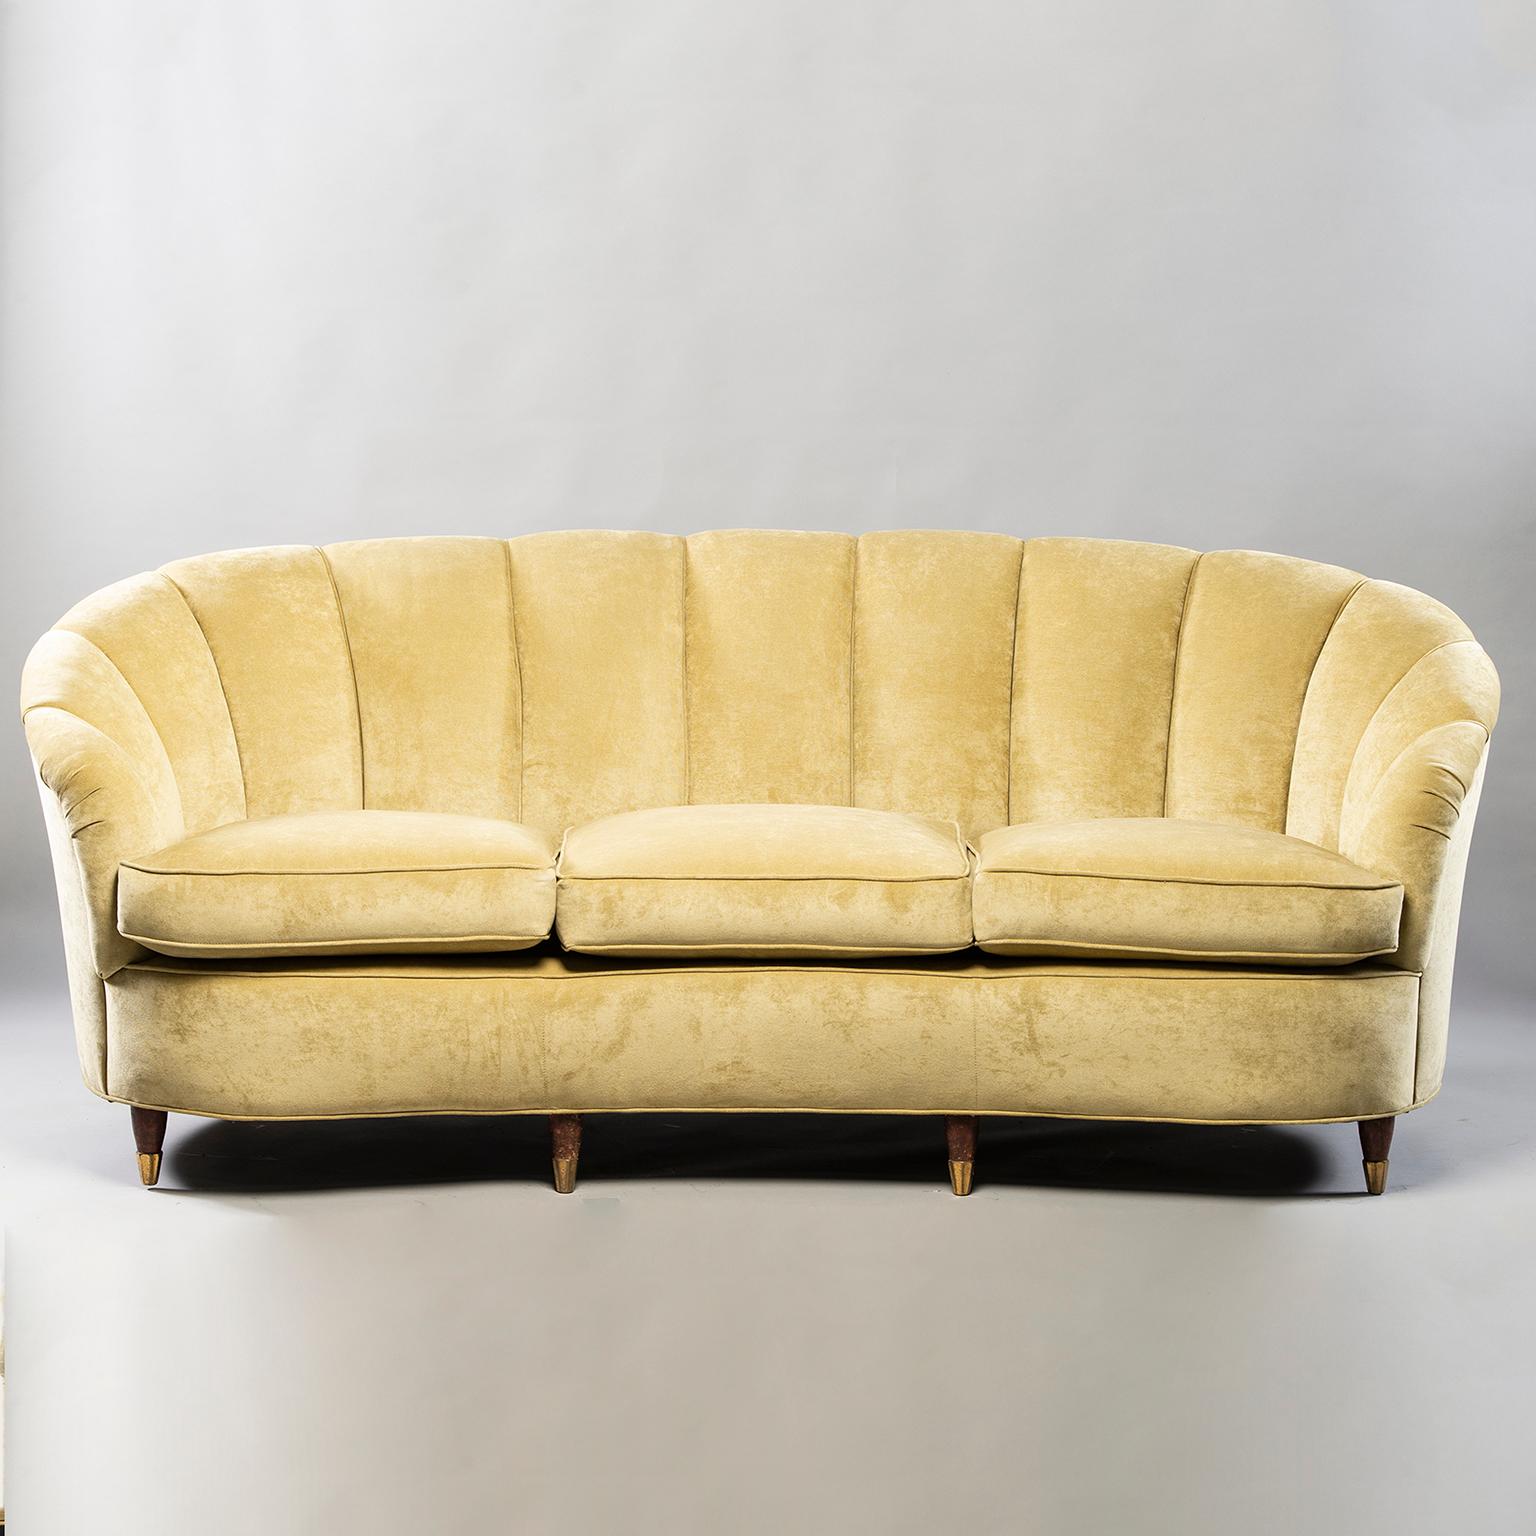 Sofa and chairs trio found in Italy and attributed to Paolo Buffa, circa 1940s. Coquille (shell) form channel back sofa and chairs have curved backrests and slightly flared arms and tapered wood legs with brass caps. Newly upholstered in a pale sage